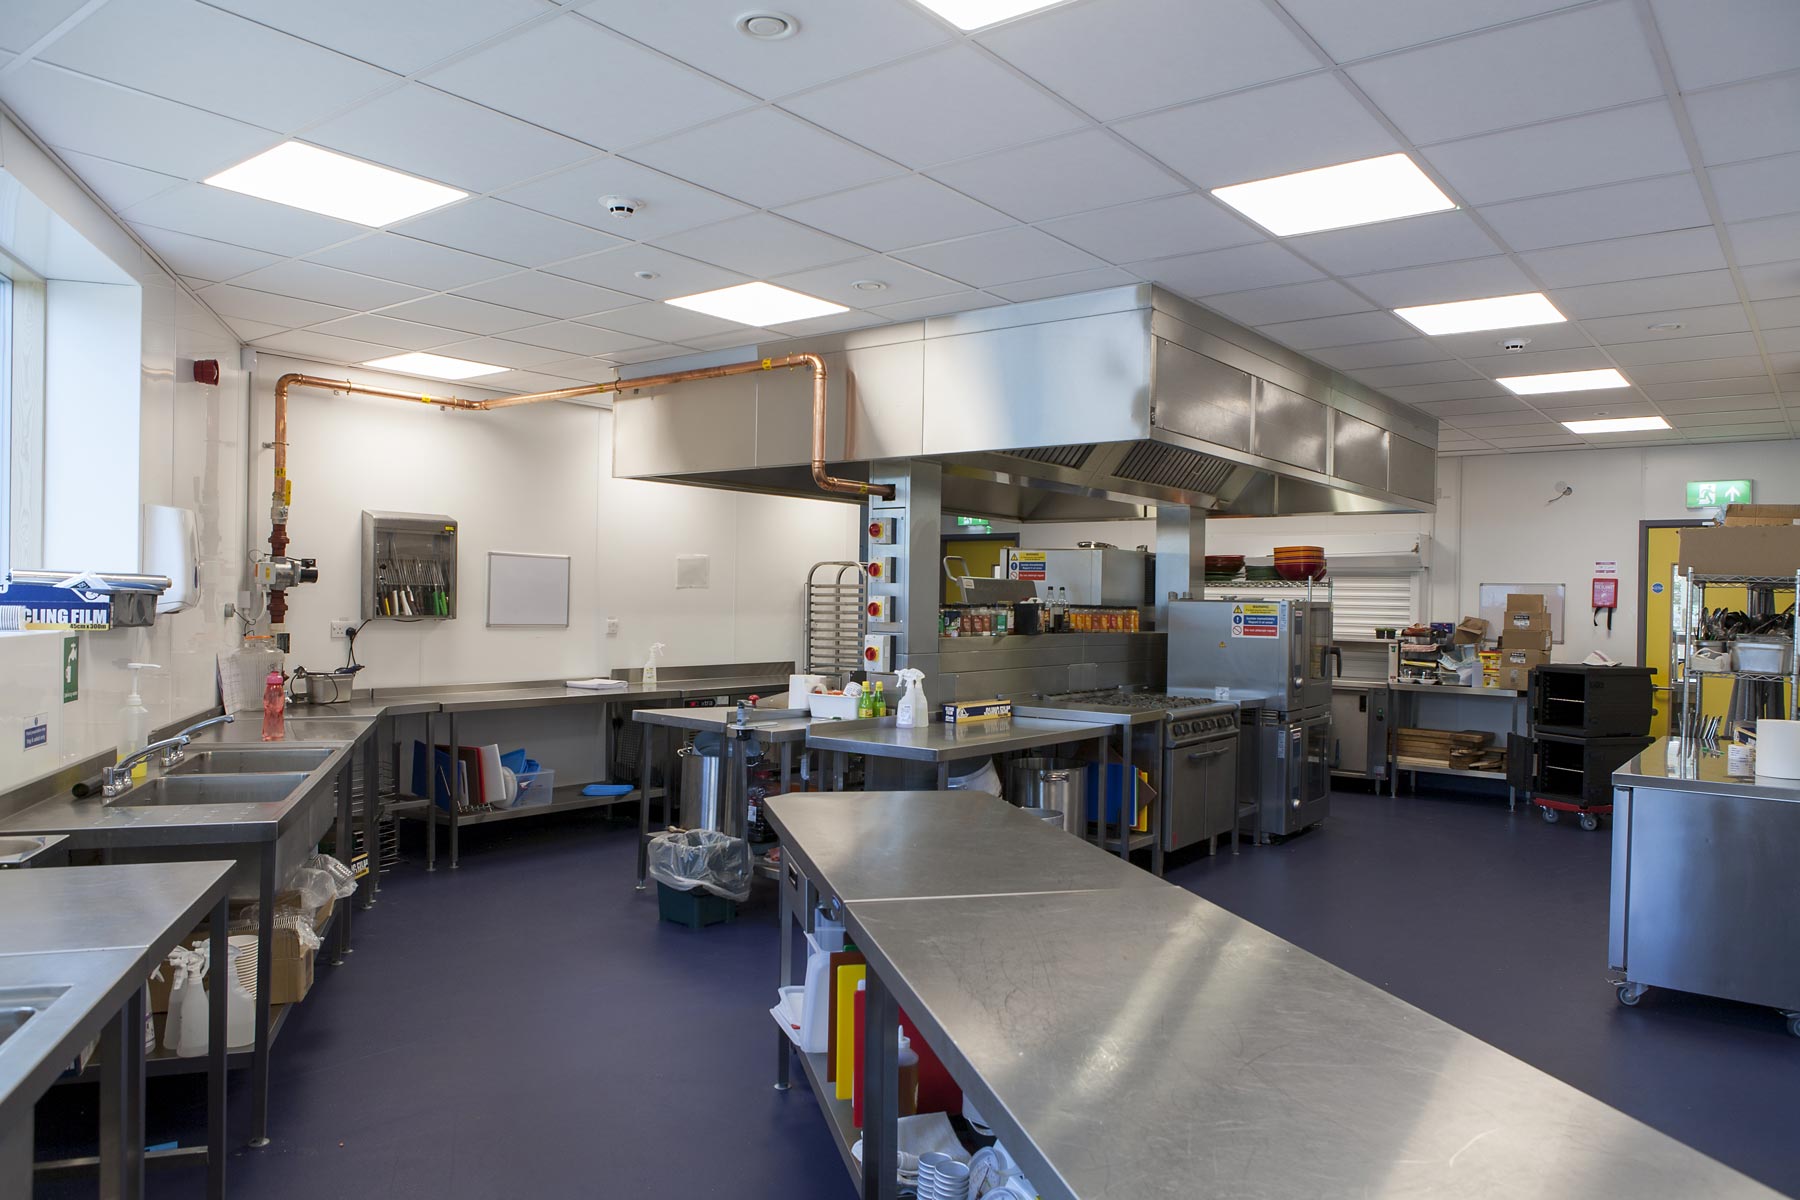 Tolworth Girls' School - New Canteen and School Kitchen